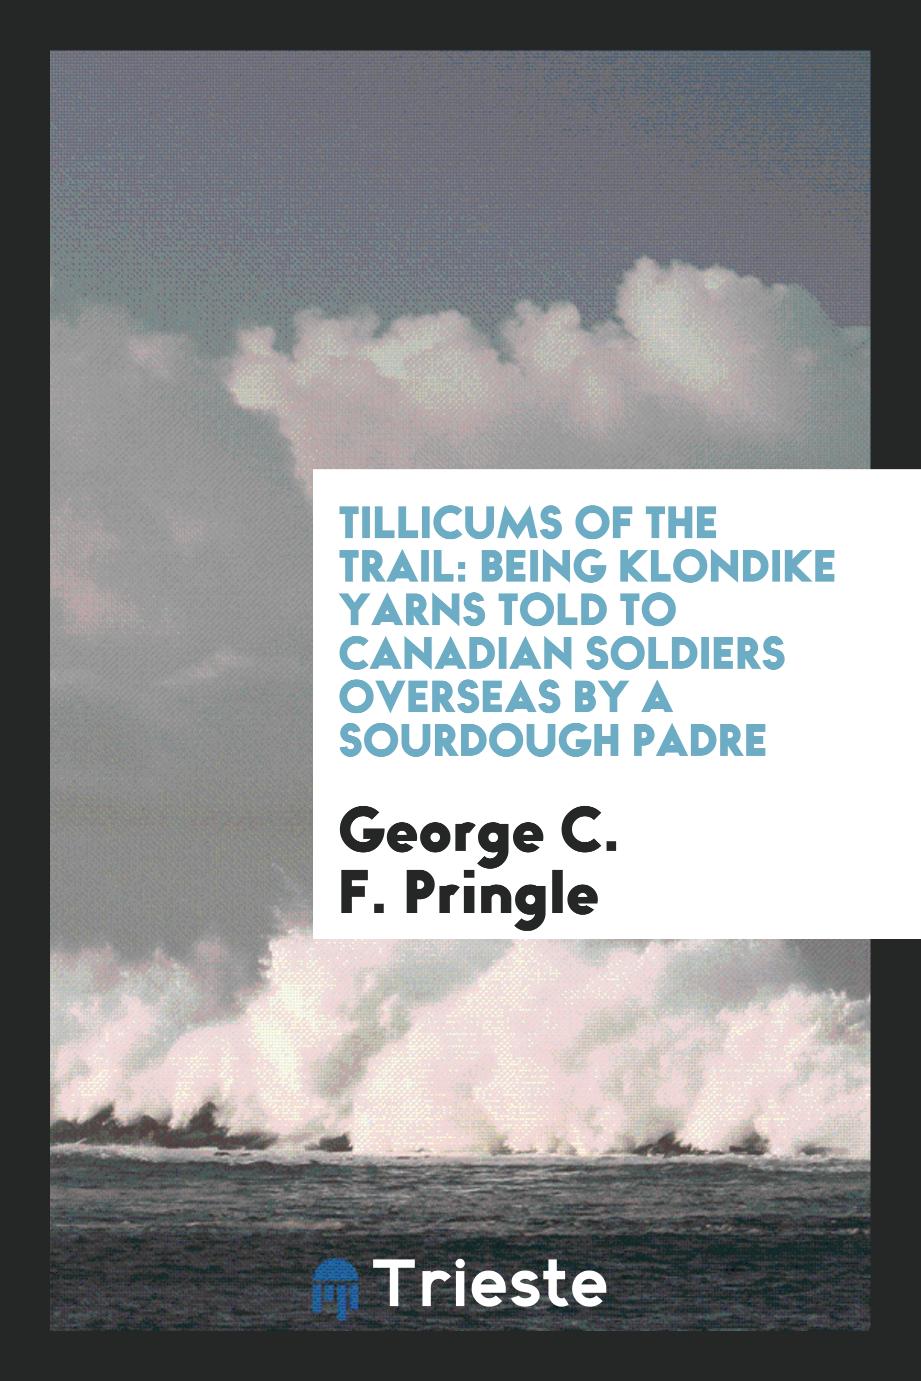 Tillicums of the trail: being Klondike yarns told to Canadian soldiers overseas by a sourdough padre